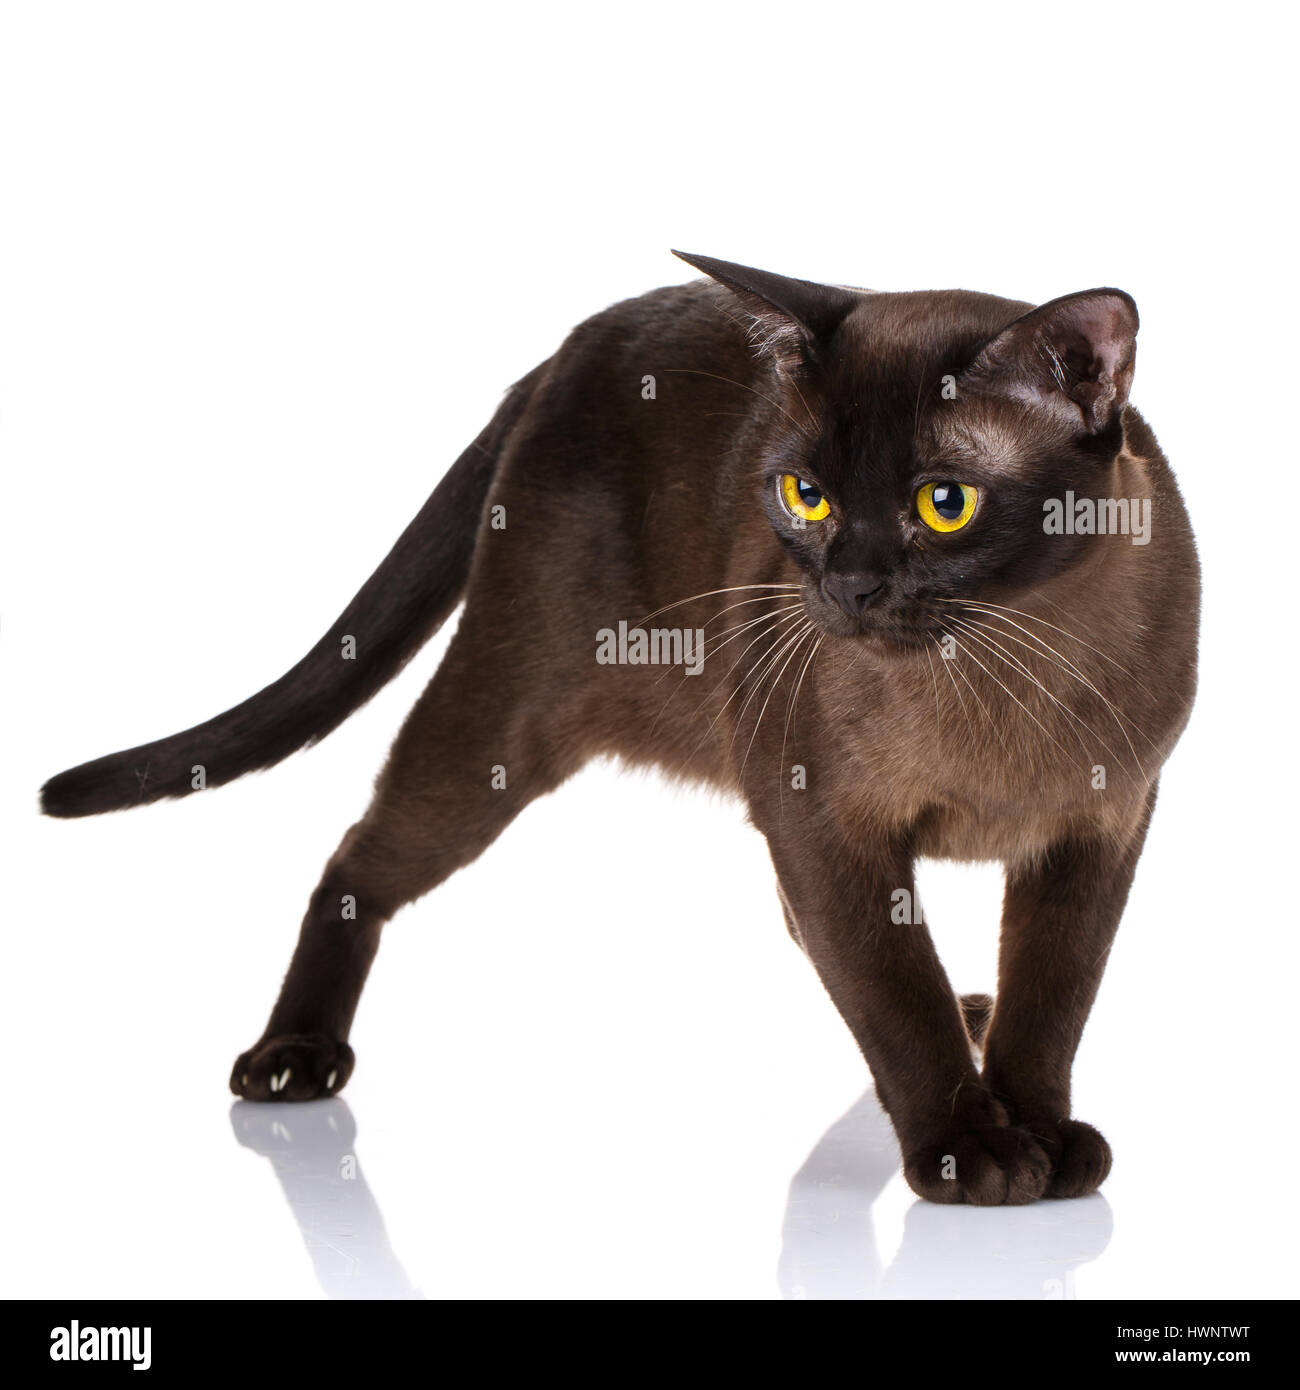 black Burmese cat with yellow eyes standing on white background Stock Photo